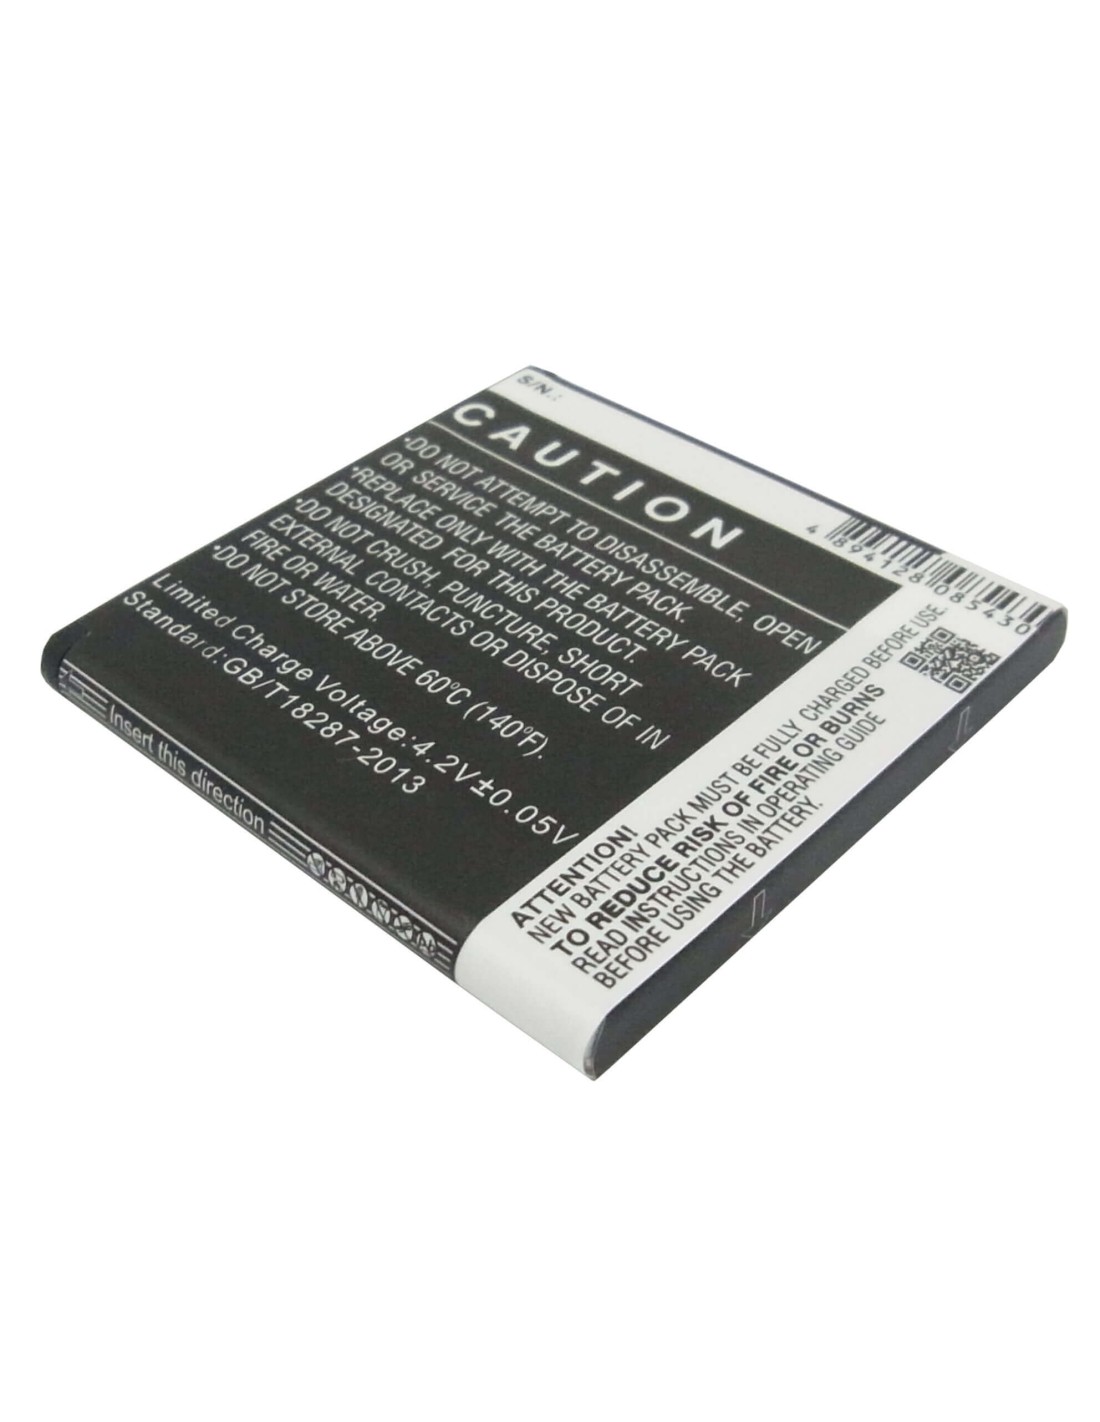 Battery for Simvalley SP-100 3.7V, 1600mAh - 5.92Wh